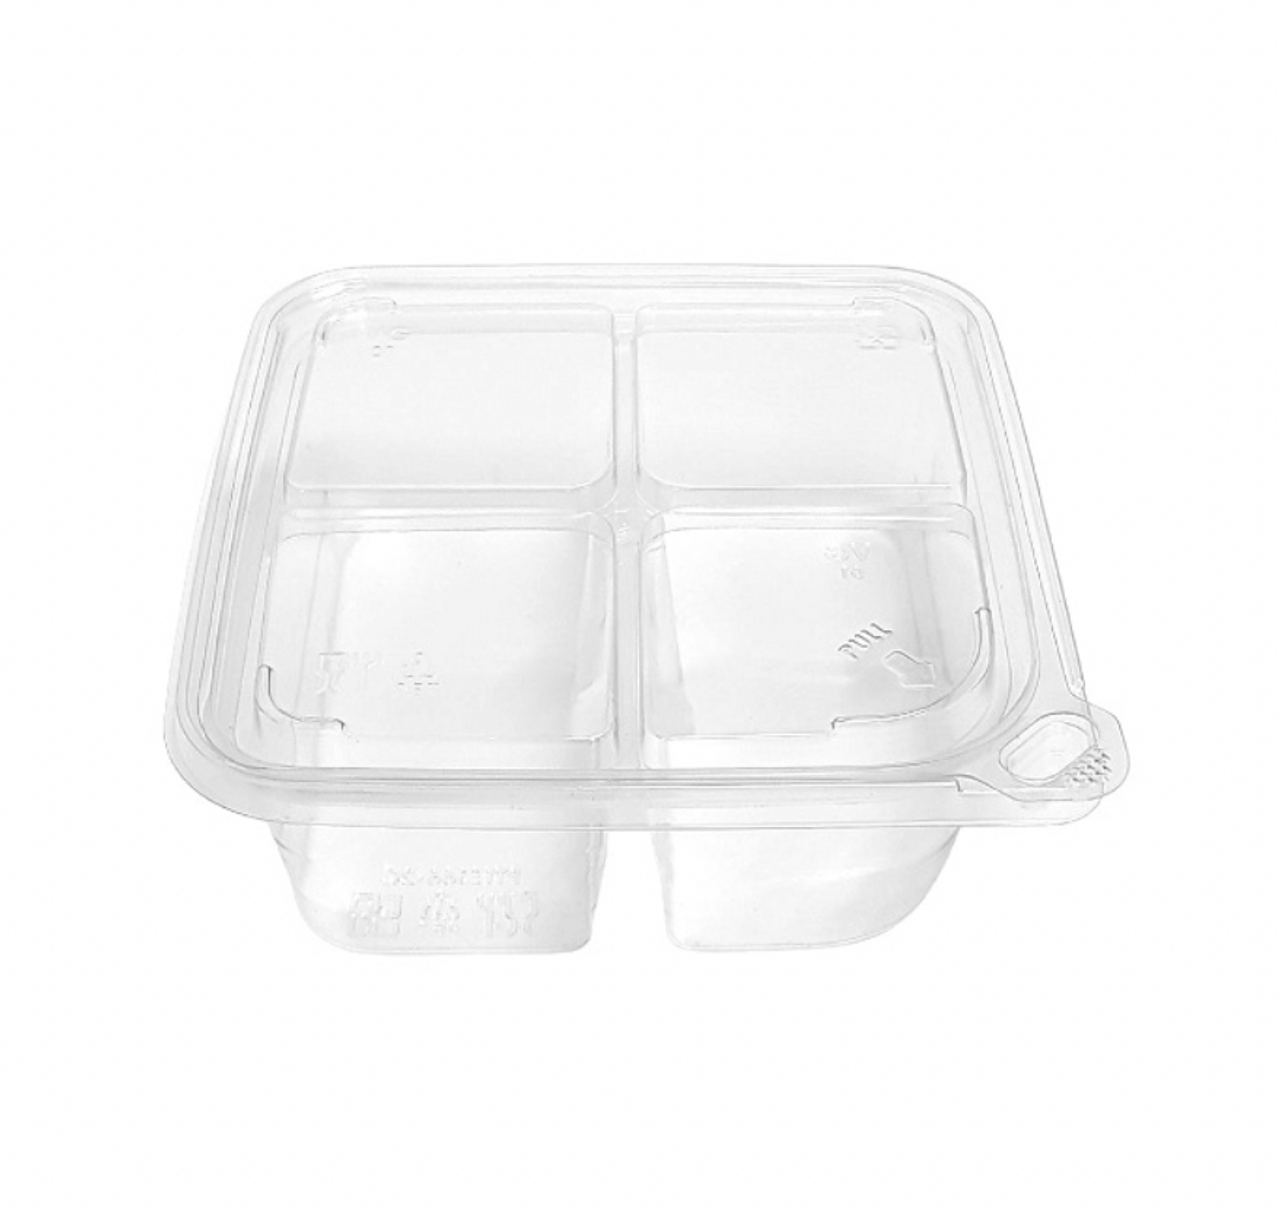 6x6 Tamper Evident 4 Compartment Clear RPET Snack Box Container